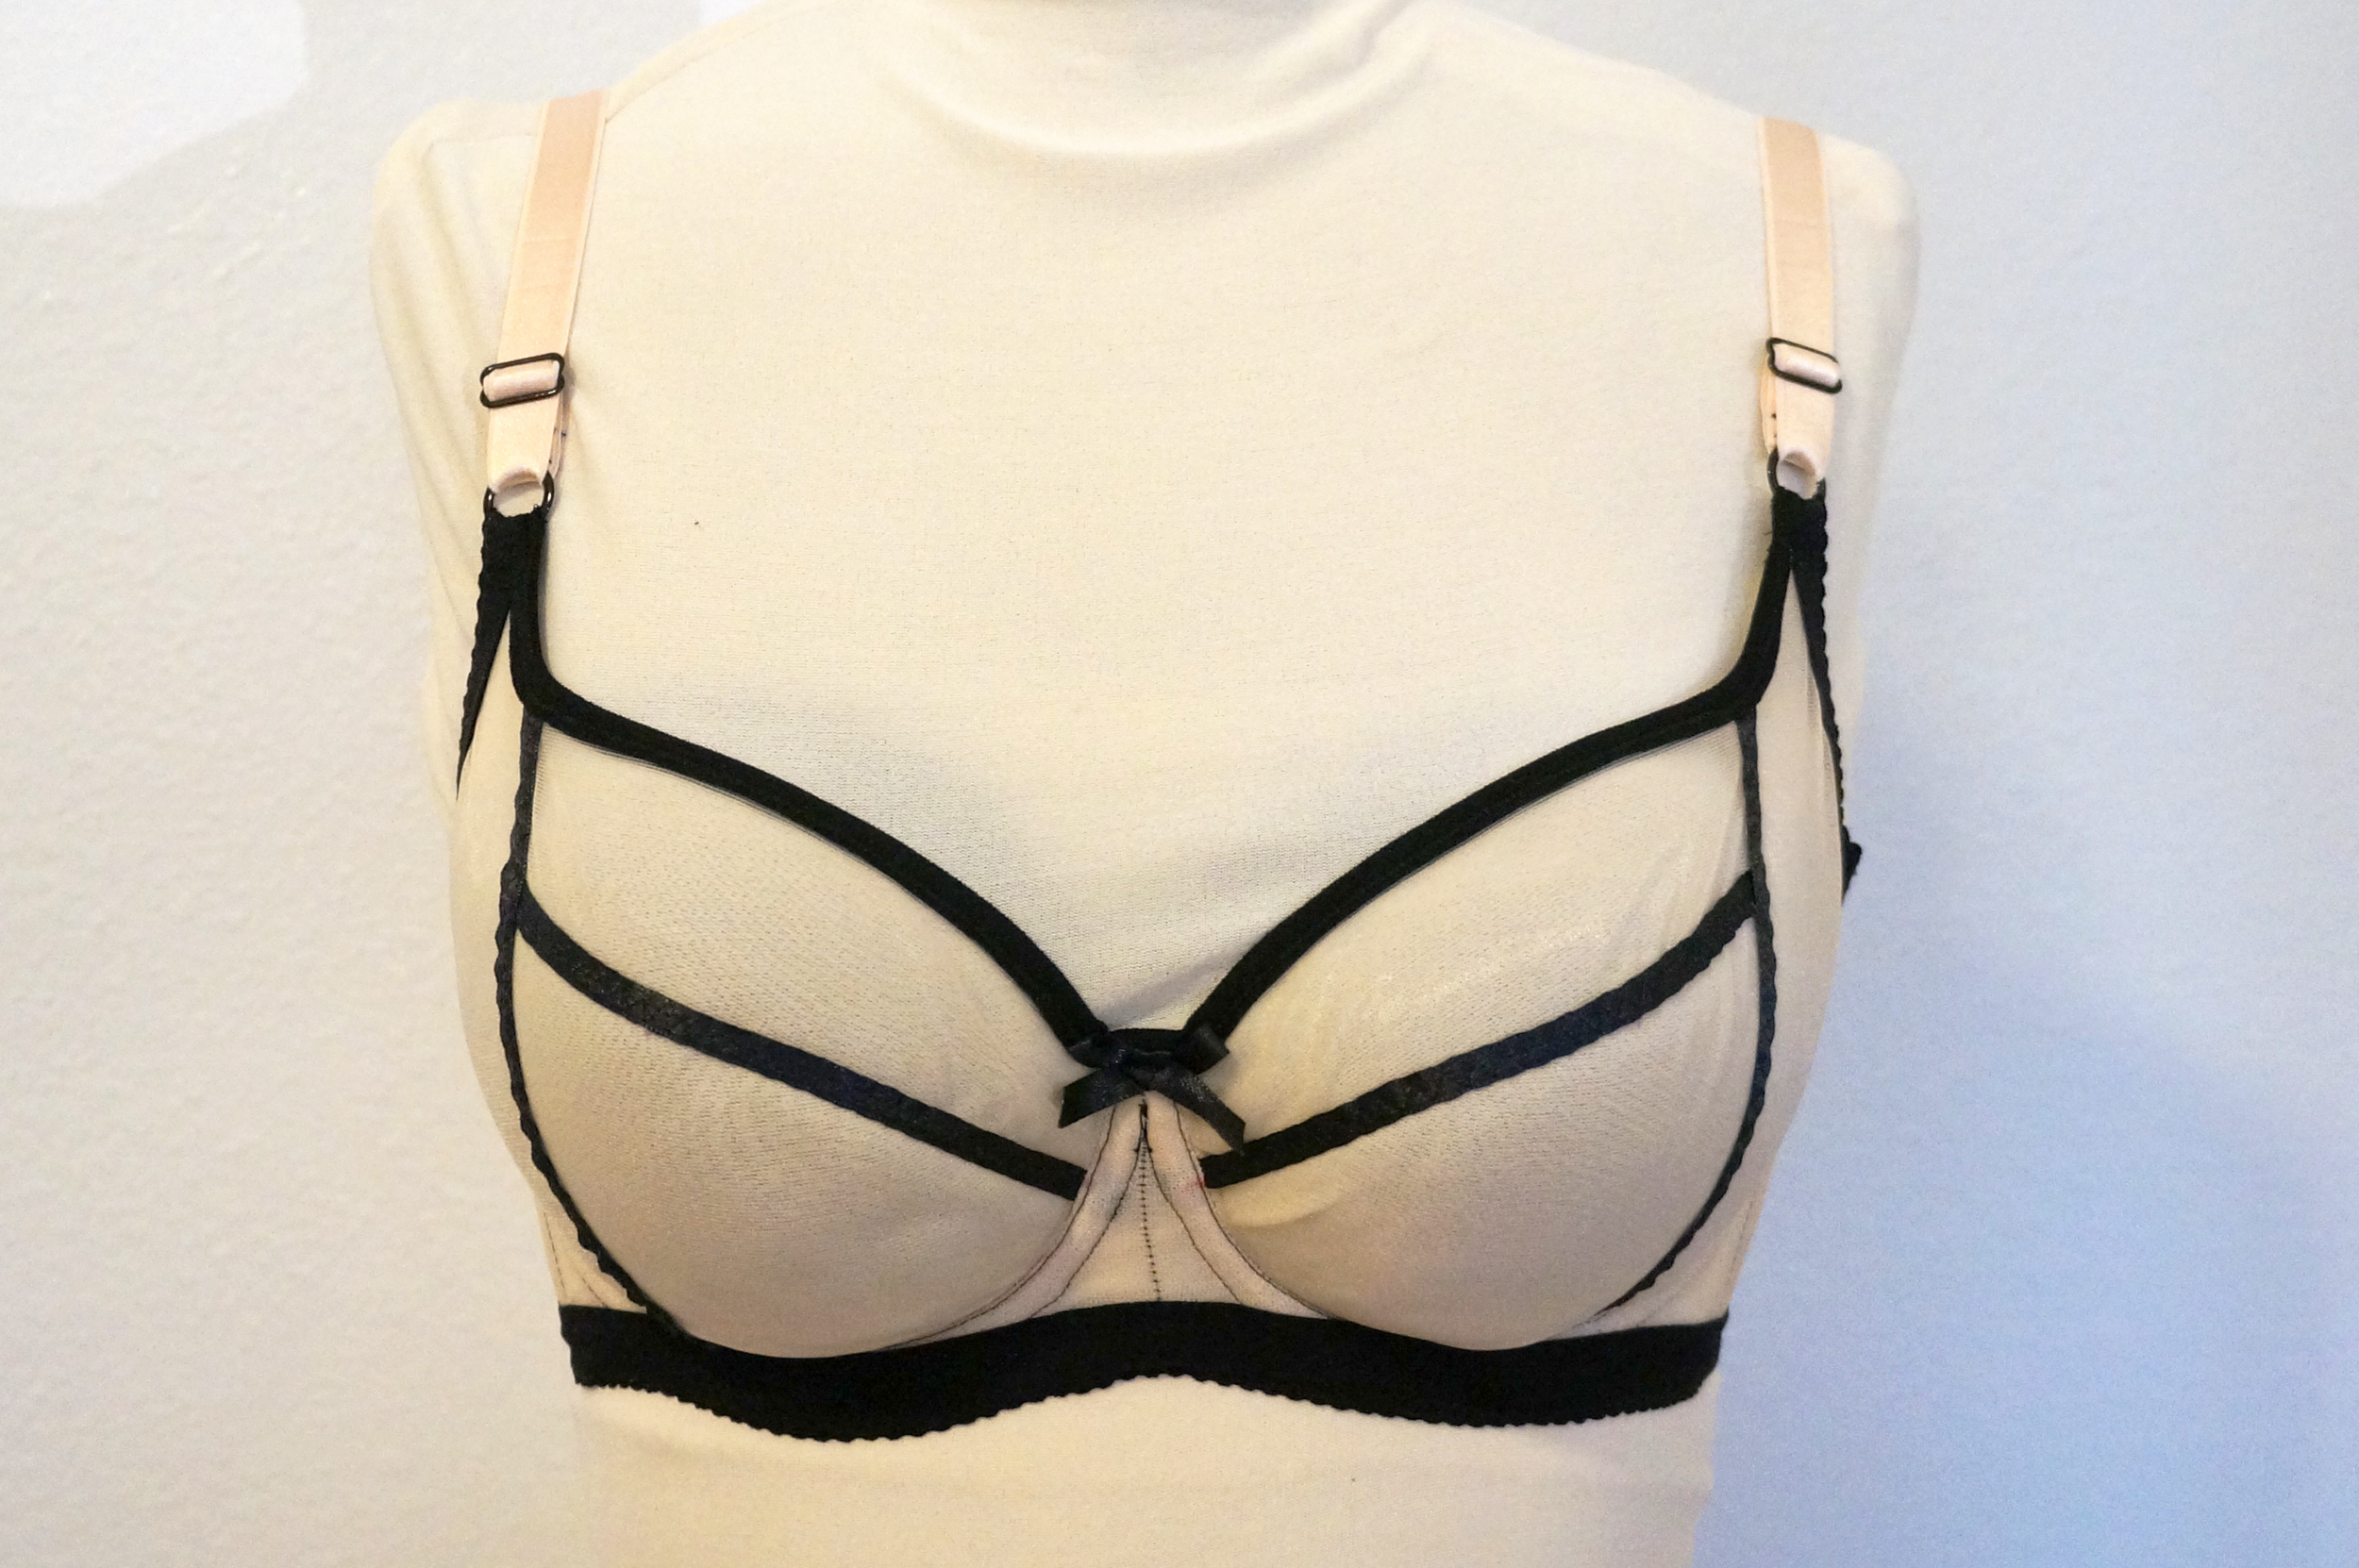 Adonising: Drafting Your Own Bra Pattern - Foundations Revealed